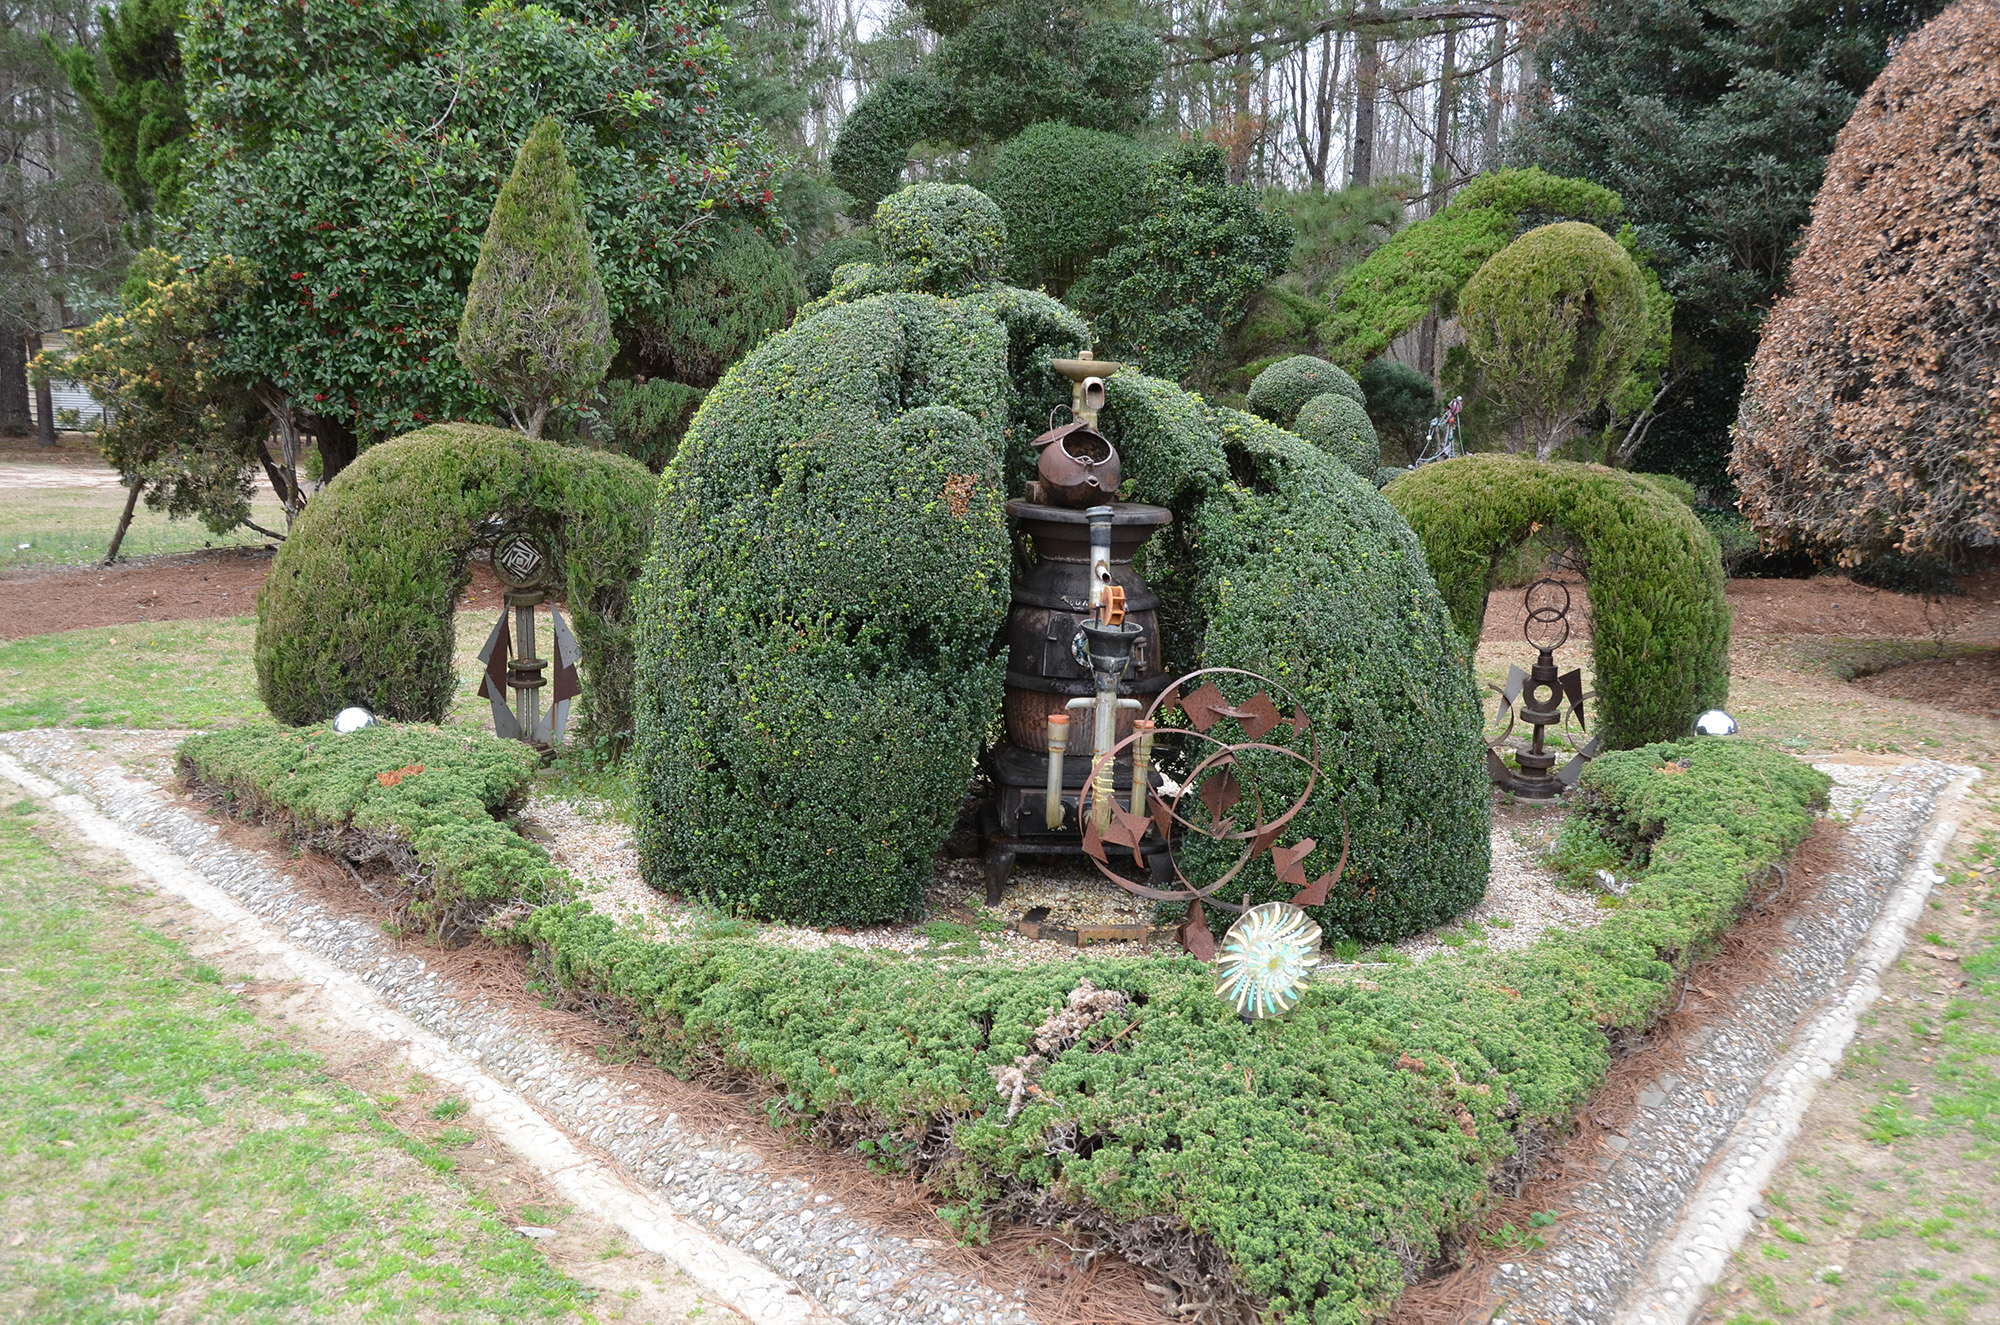 Pearl Fryar Topiary Garden puts Bishopville, S.C., on the photo picture